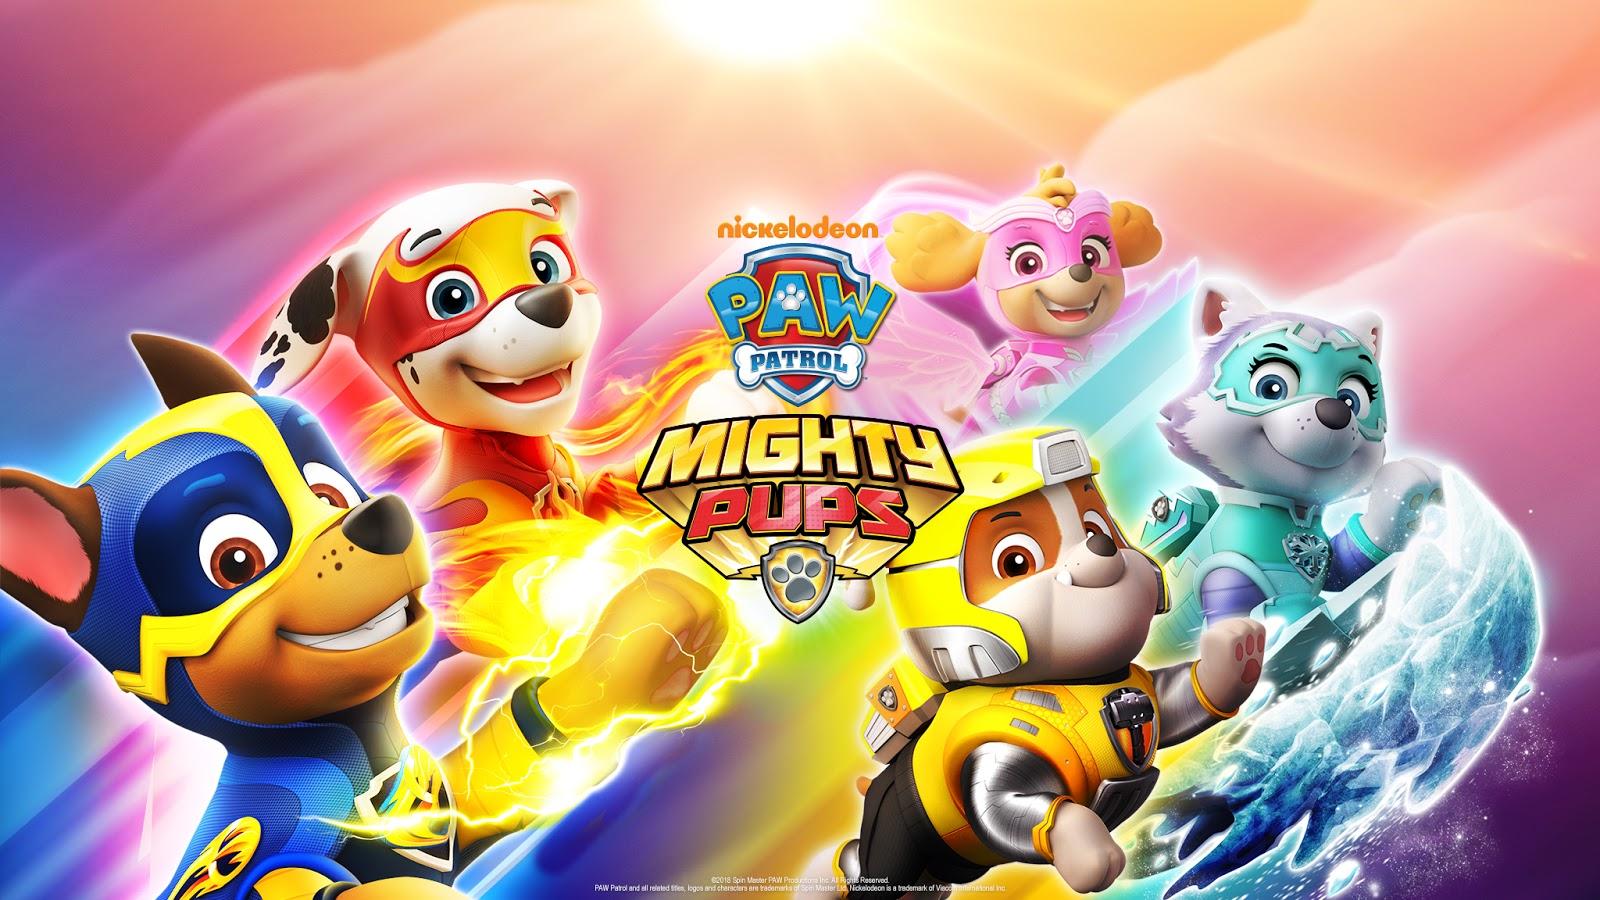 Mighty Pups Wallpaper Free Mighty Pups Background